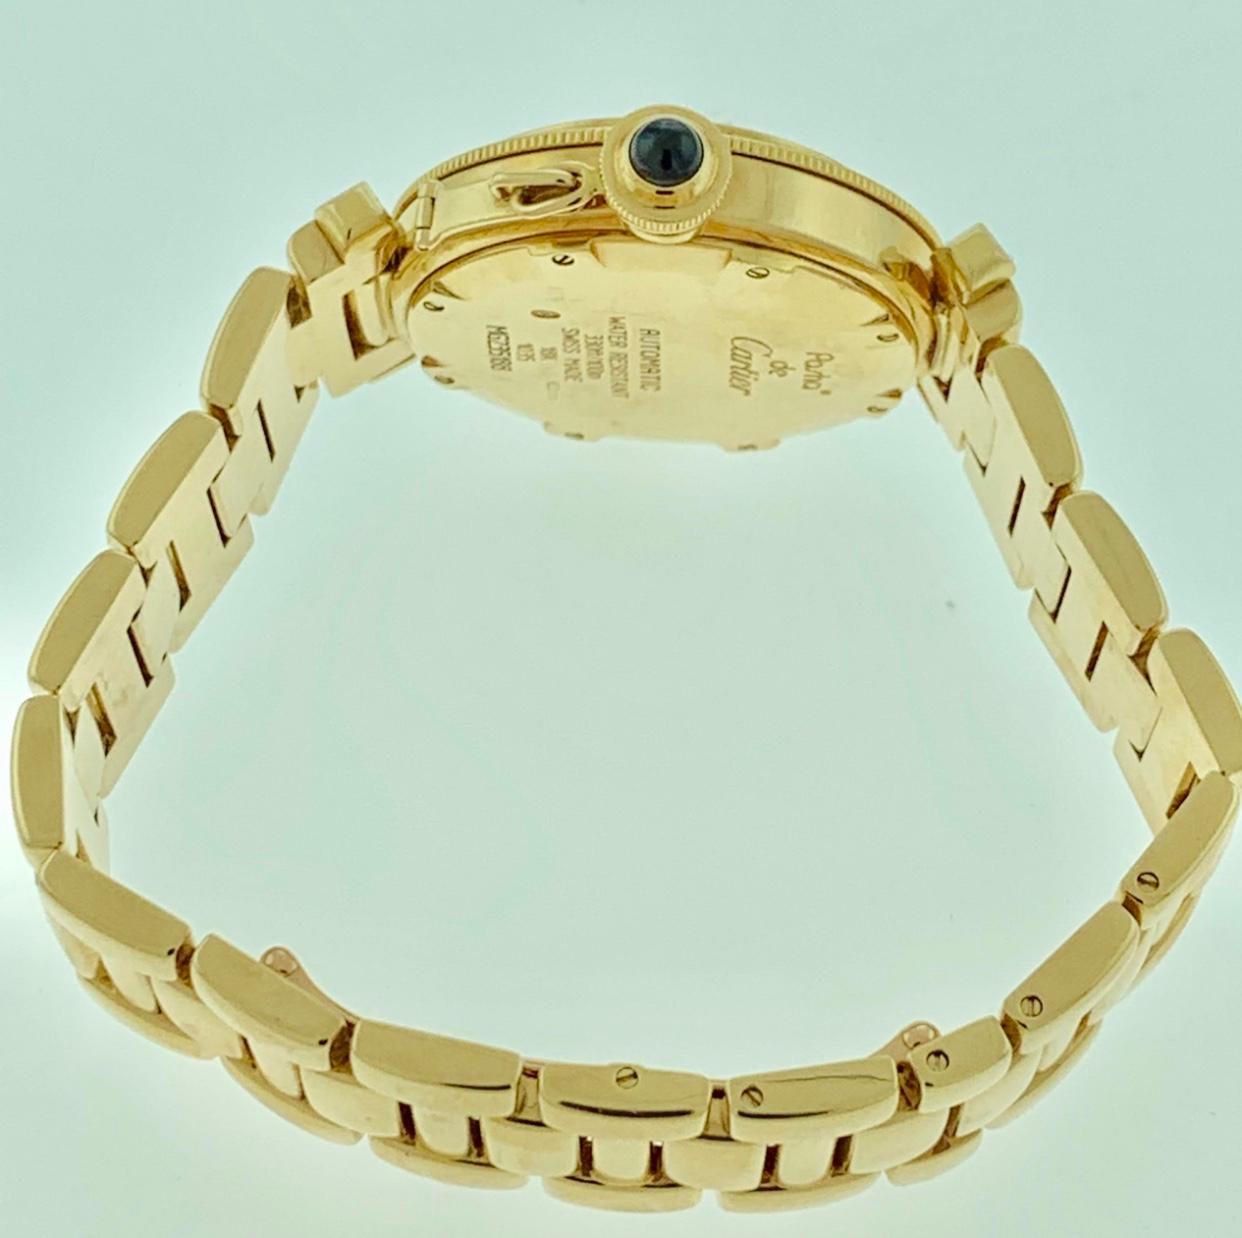 150 Gm 18 Karat Solid Yellow Gold Cartier Pasha Automatic Watch Water Resistant 6